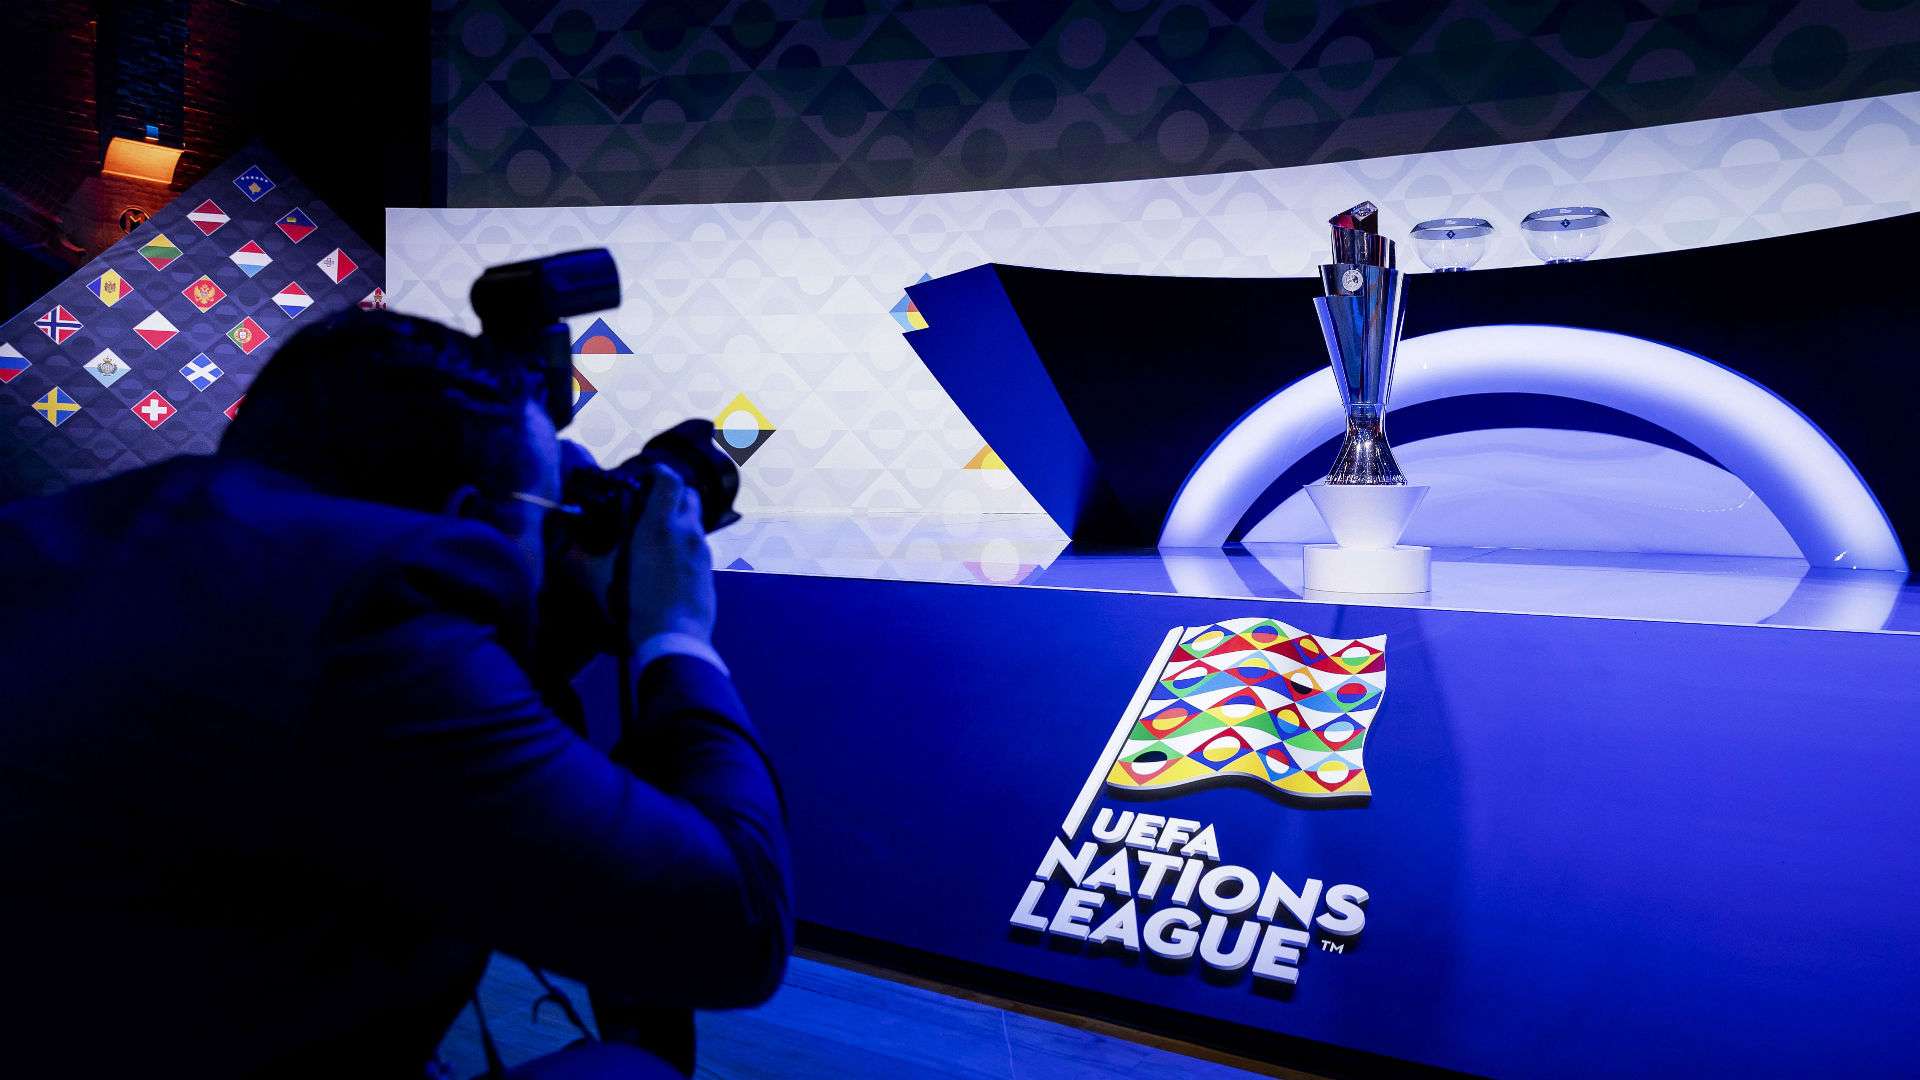 Nations League draw